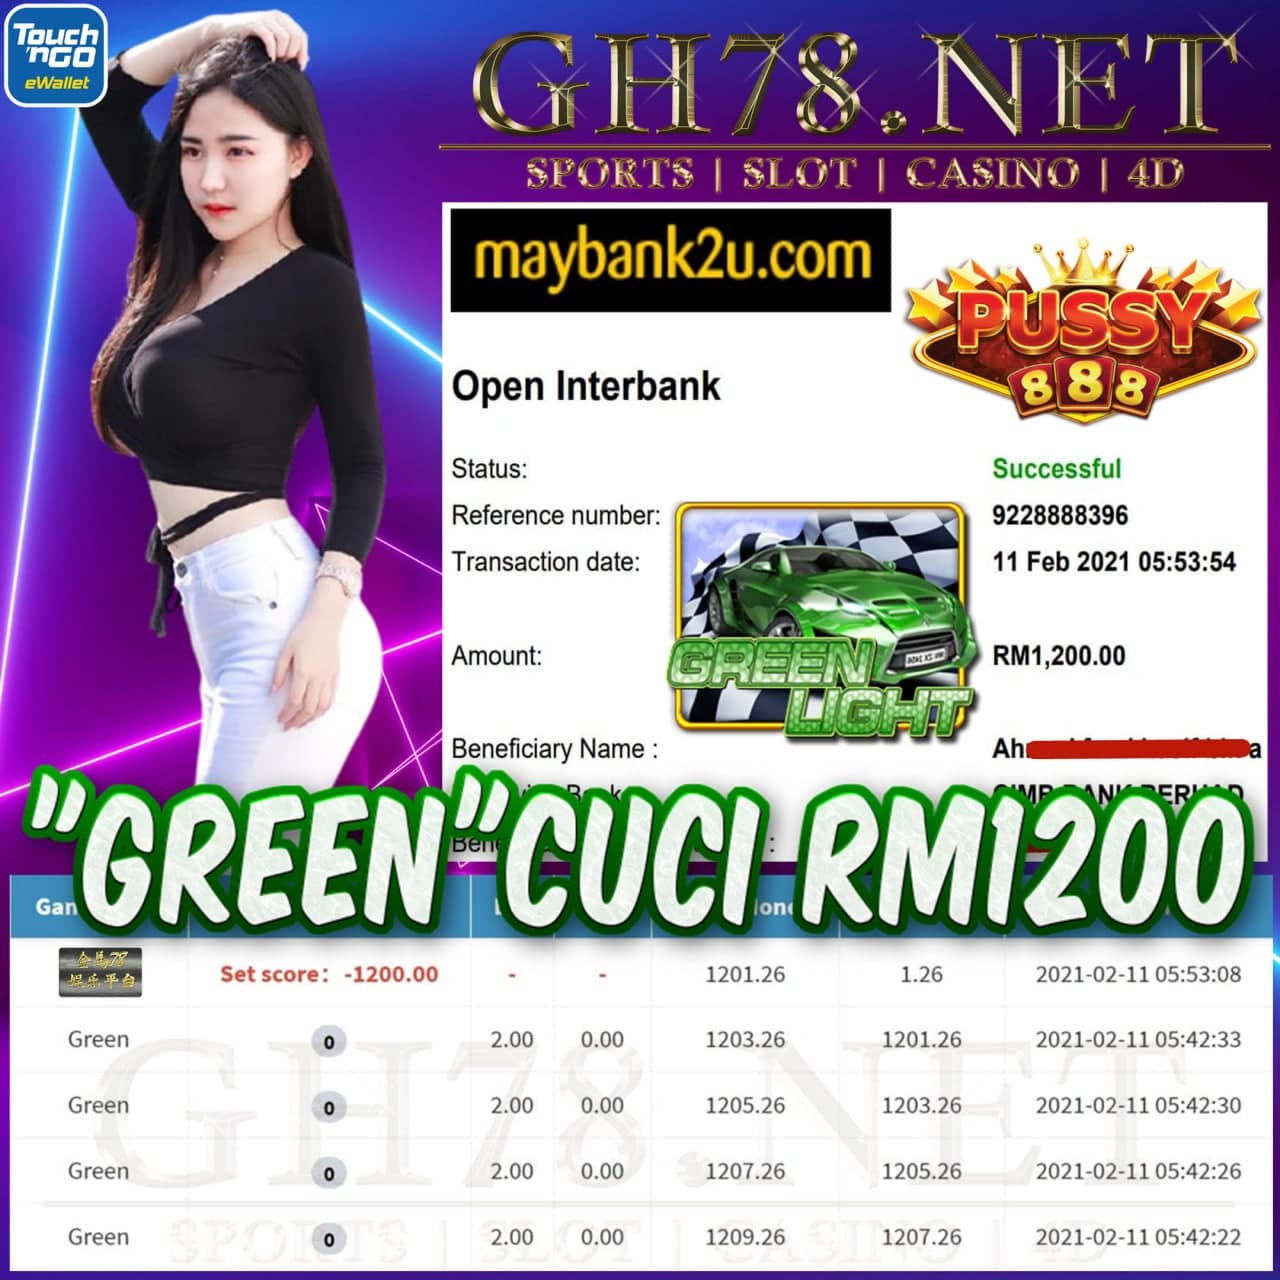 PUSSY888 GREEN LIGHT GAME CUCI RM1200